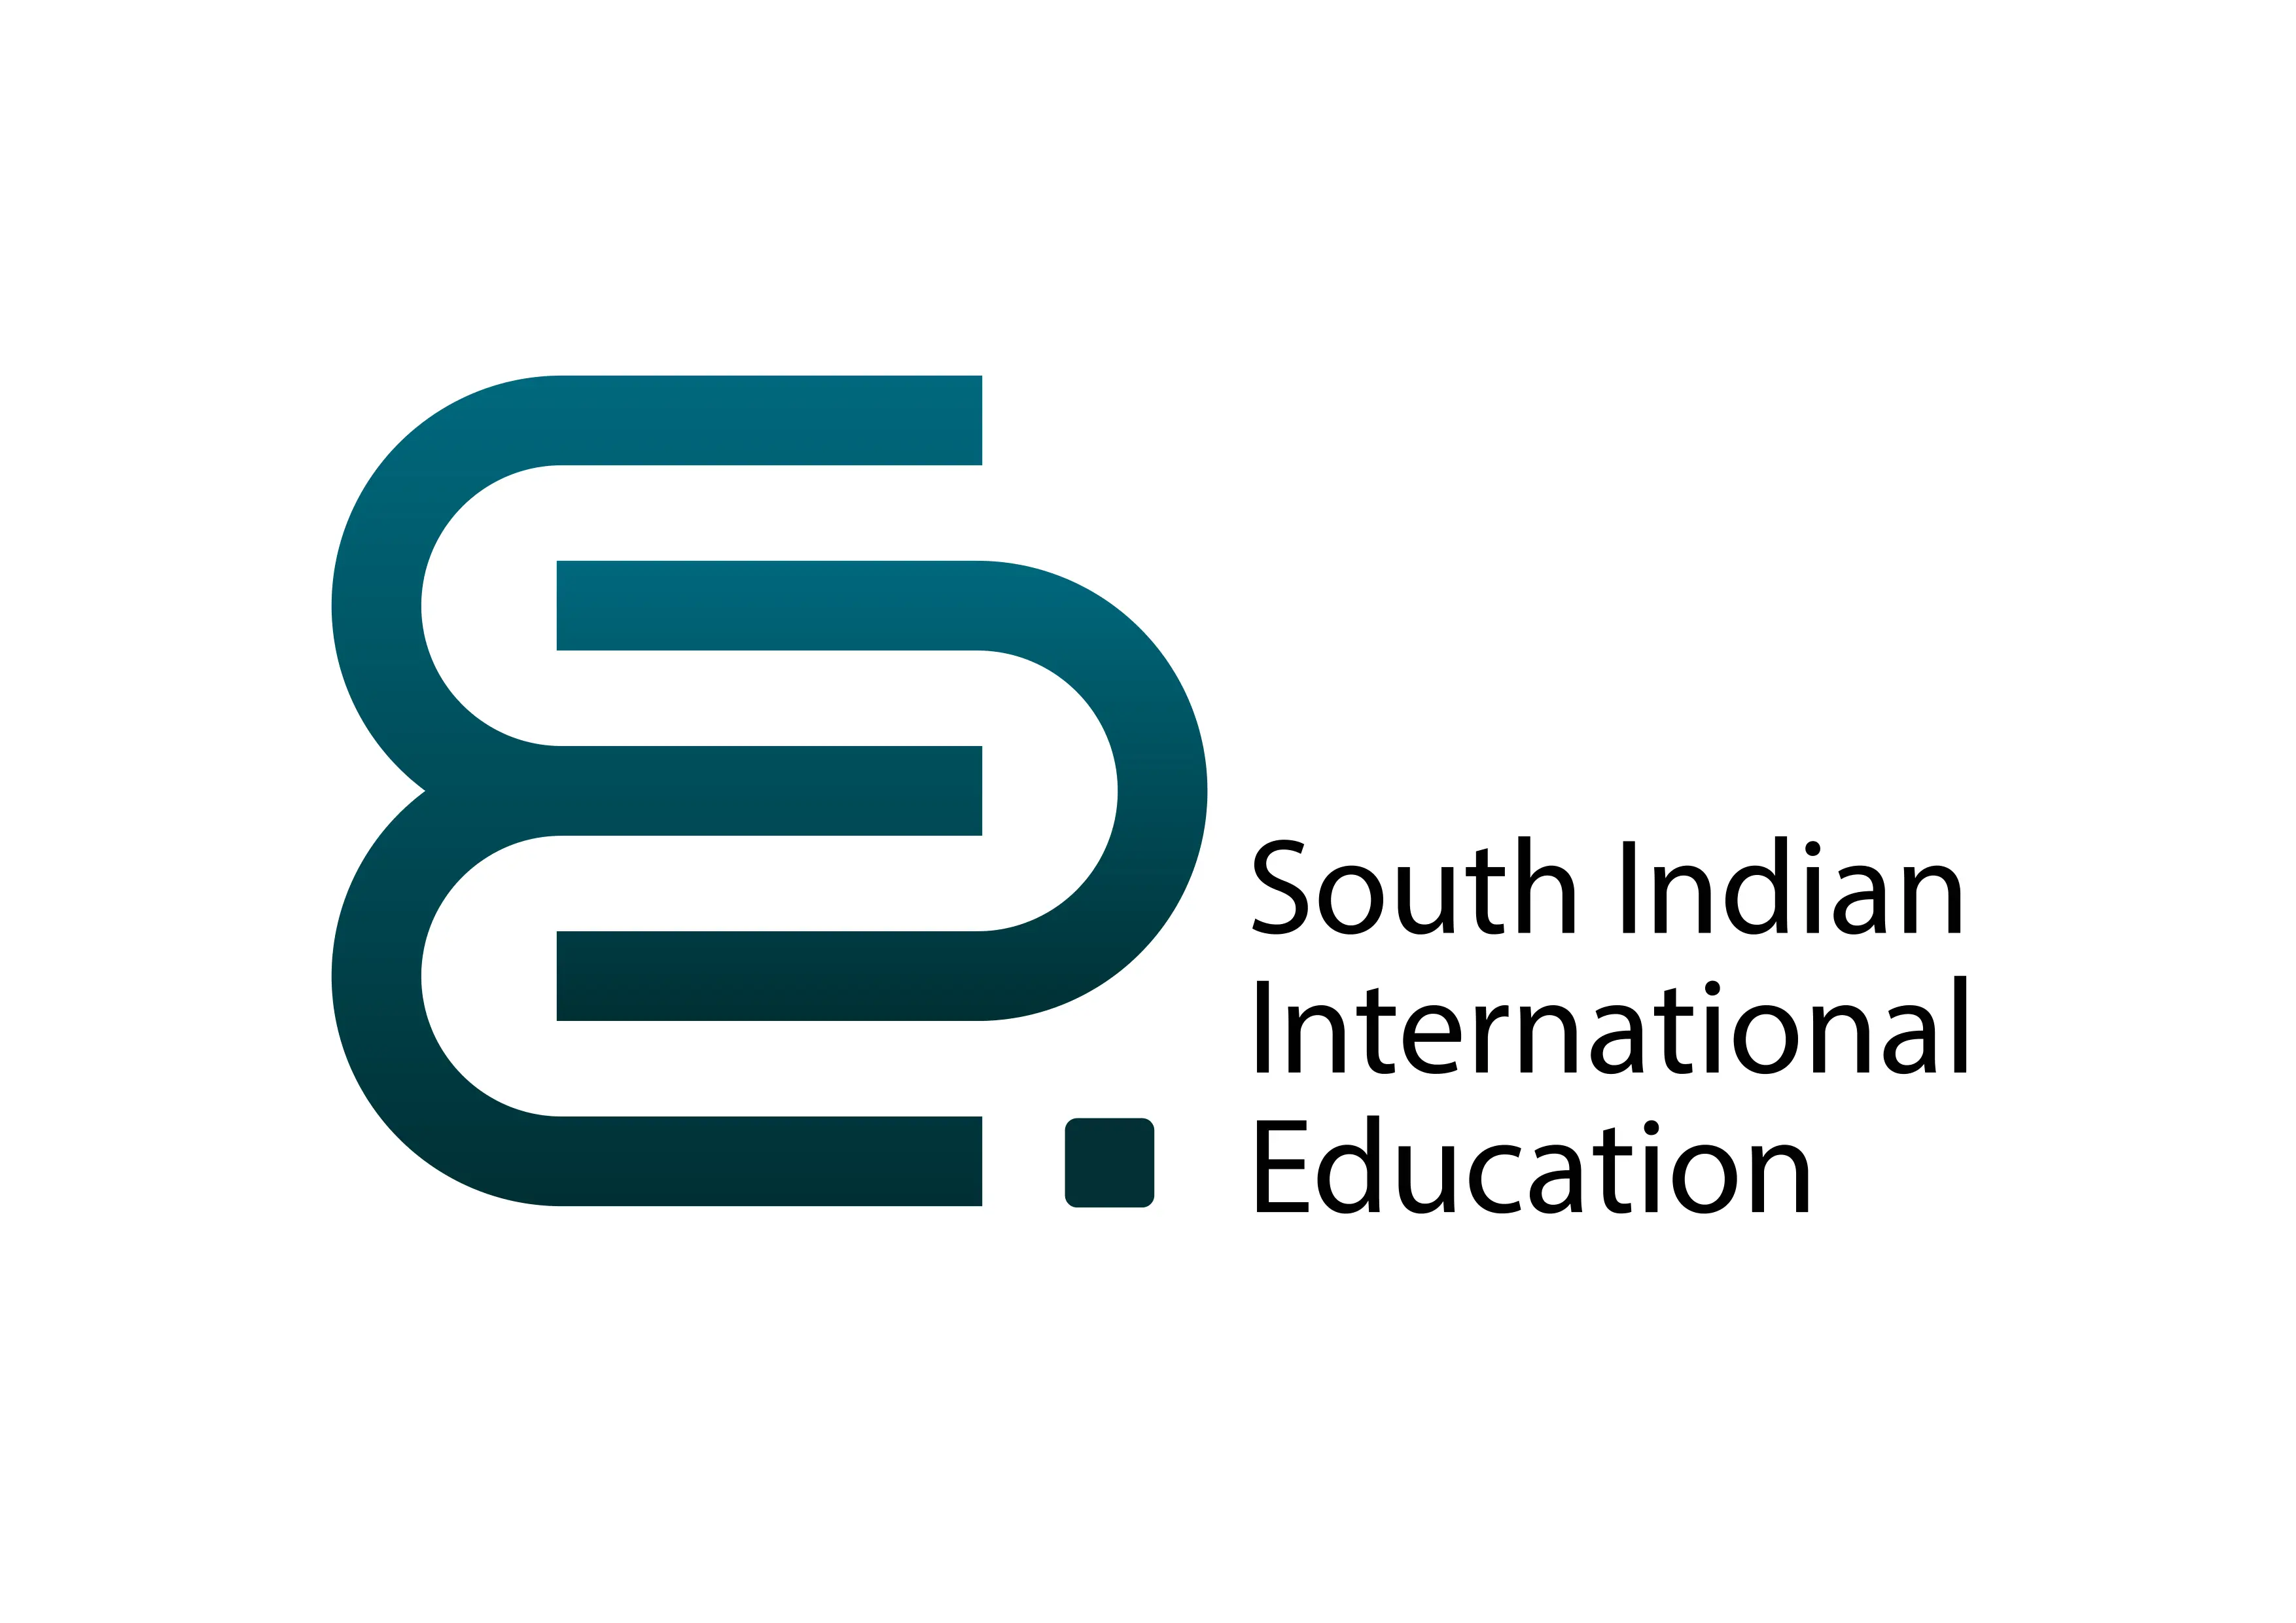 South Indian International Education